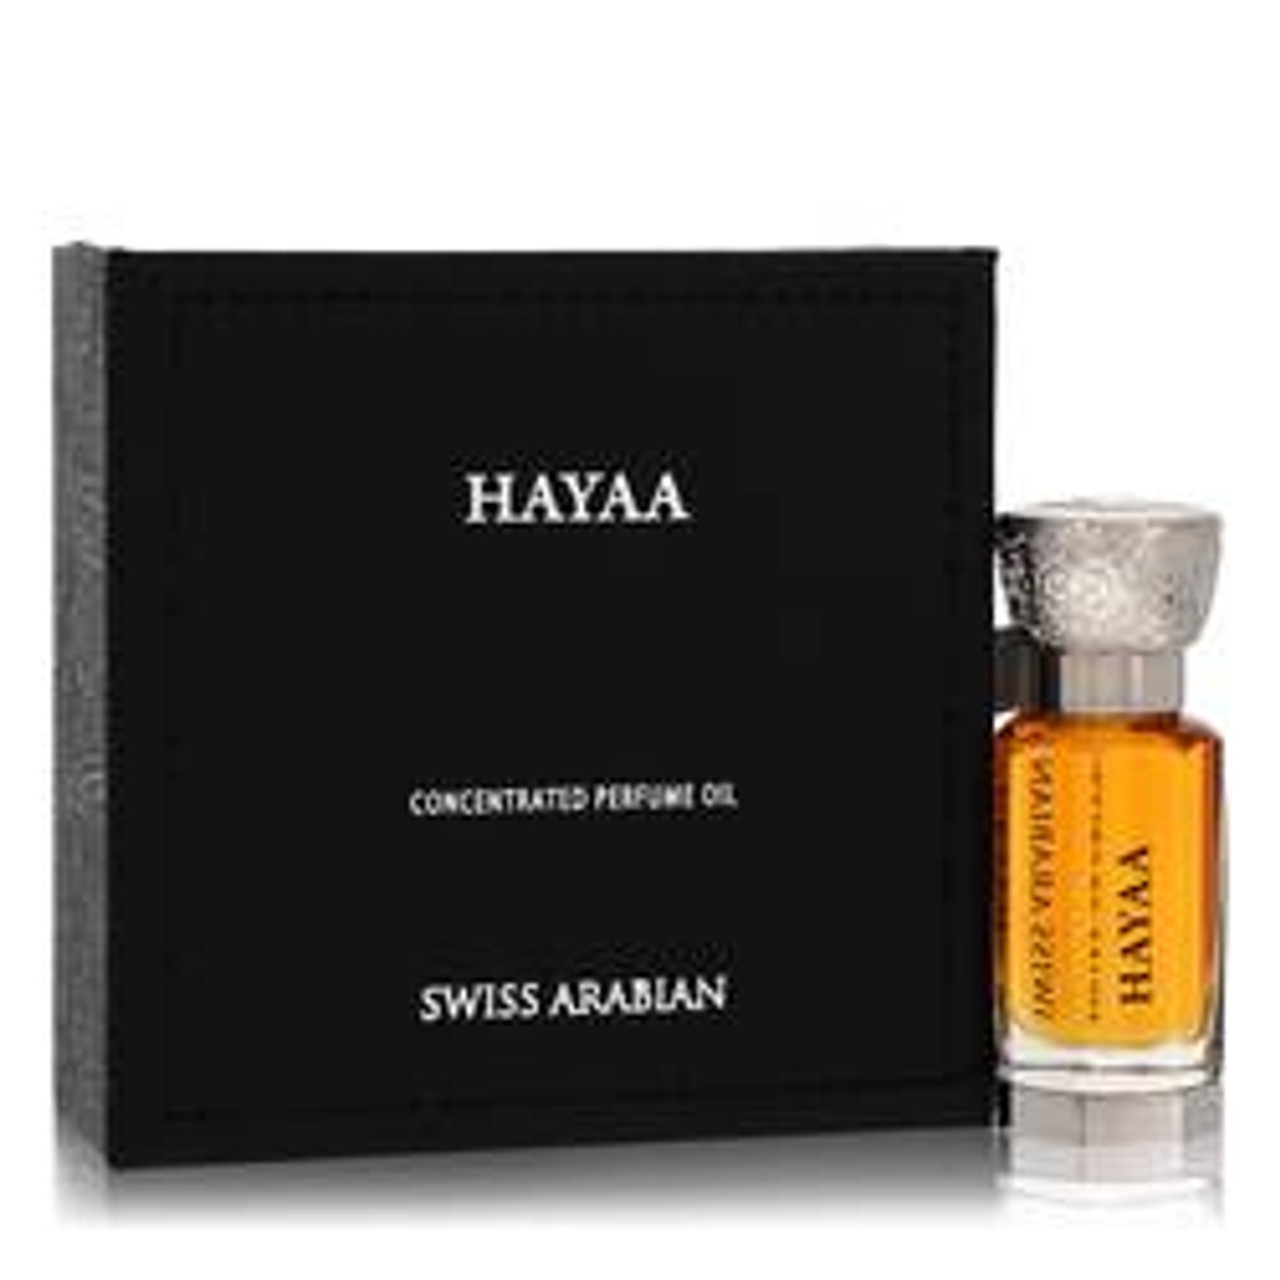 Swiss Arabian Hayaa Perfume By Swiss Arabian Concentrated Perfume Oil (Unisex) 0.4 oz for Women - [From 116.00 - Choose pk Qty ] - *Ships from Miami